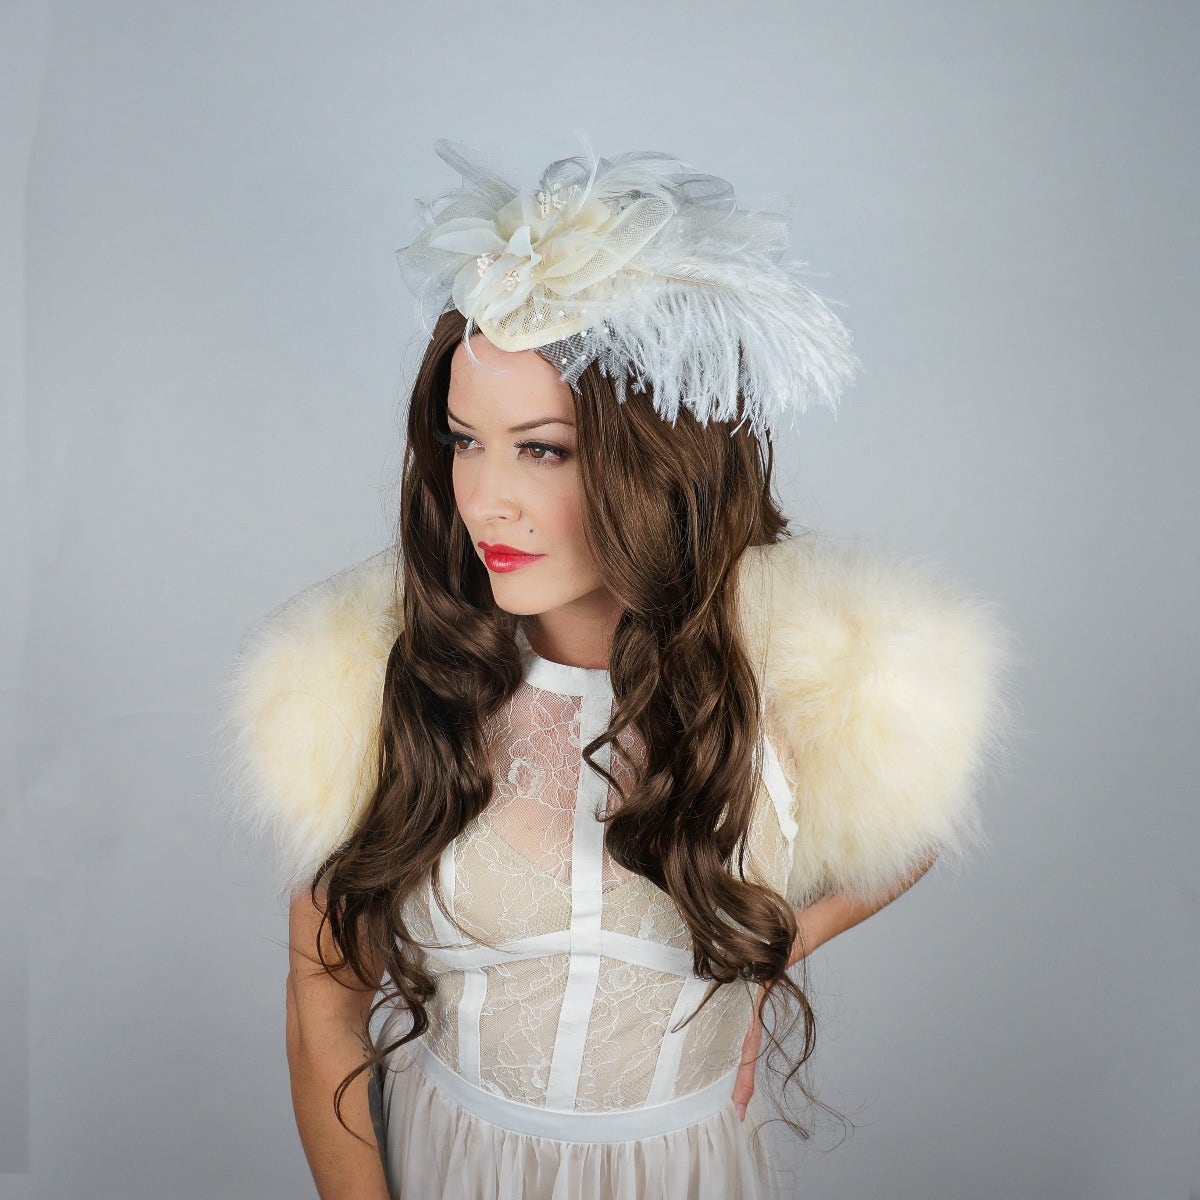 Ostrich Feather Fascinator Wedding, Victorian Style Party Hair Accessory - Ivory